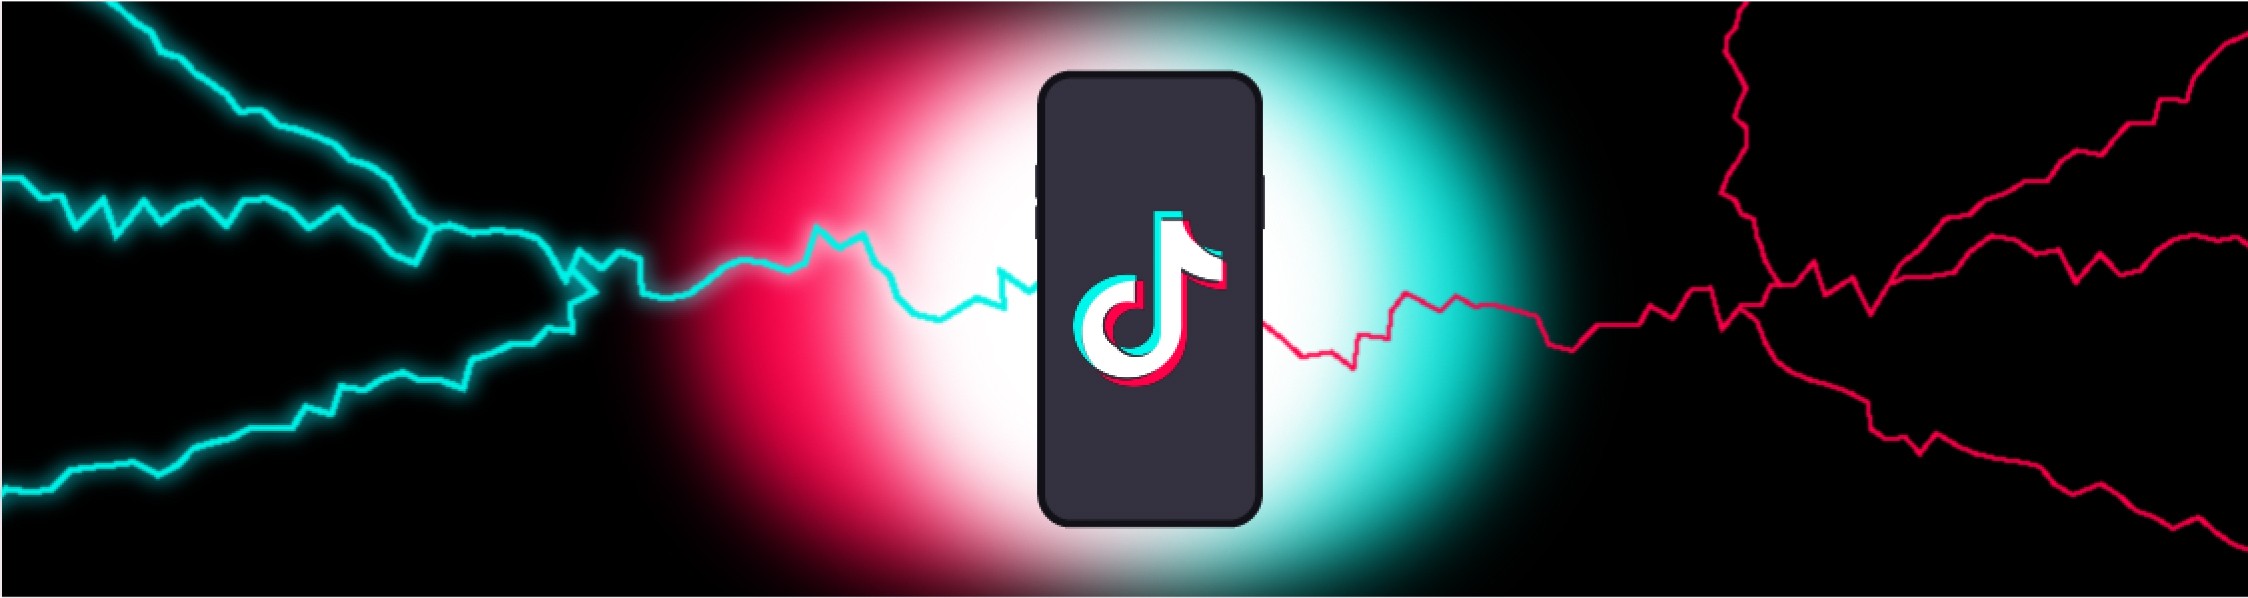 How To Get TikTok Likes For Free And Instantly